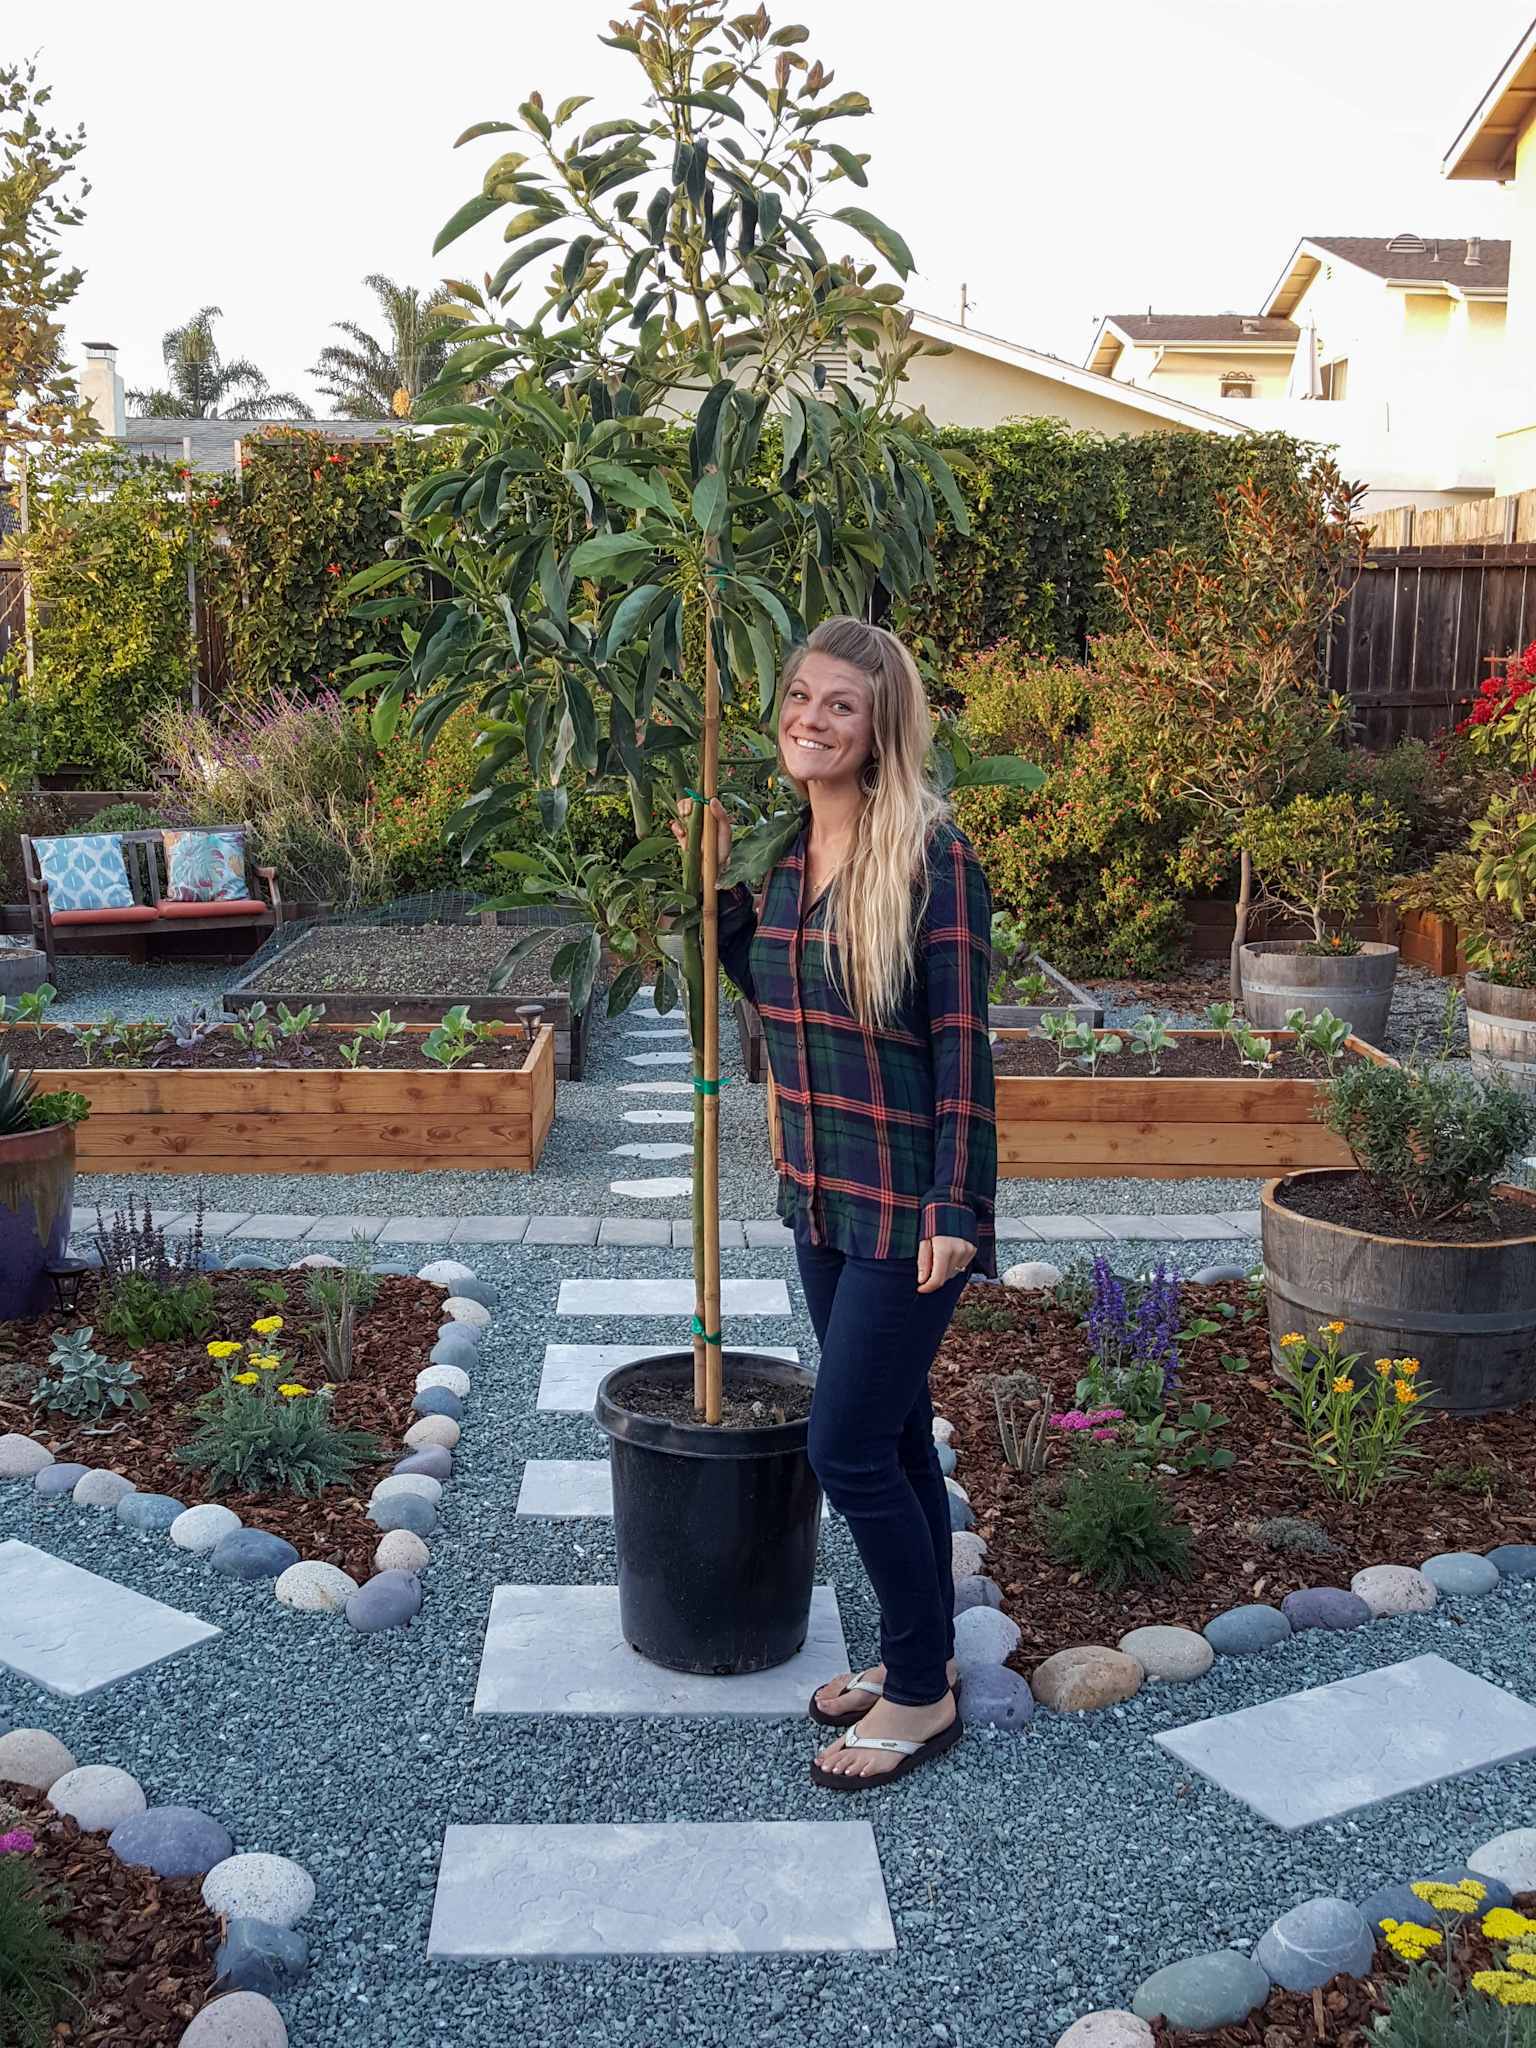 DeannaCat is standing next to a young Hass avocado tree in a 15 gallon nursery pot. She is standing in the front yard amongst a number of flowering perennials, annuals, raised garden beds full of vegetables, shrubs, vines, and trees. 